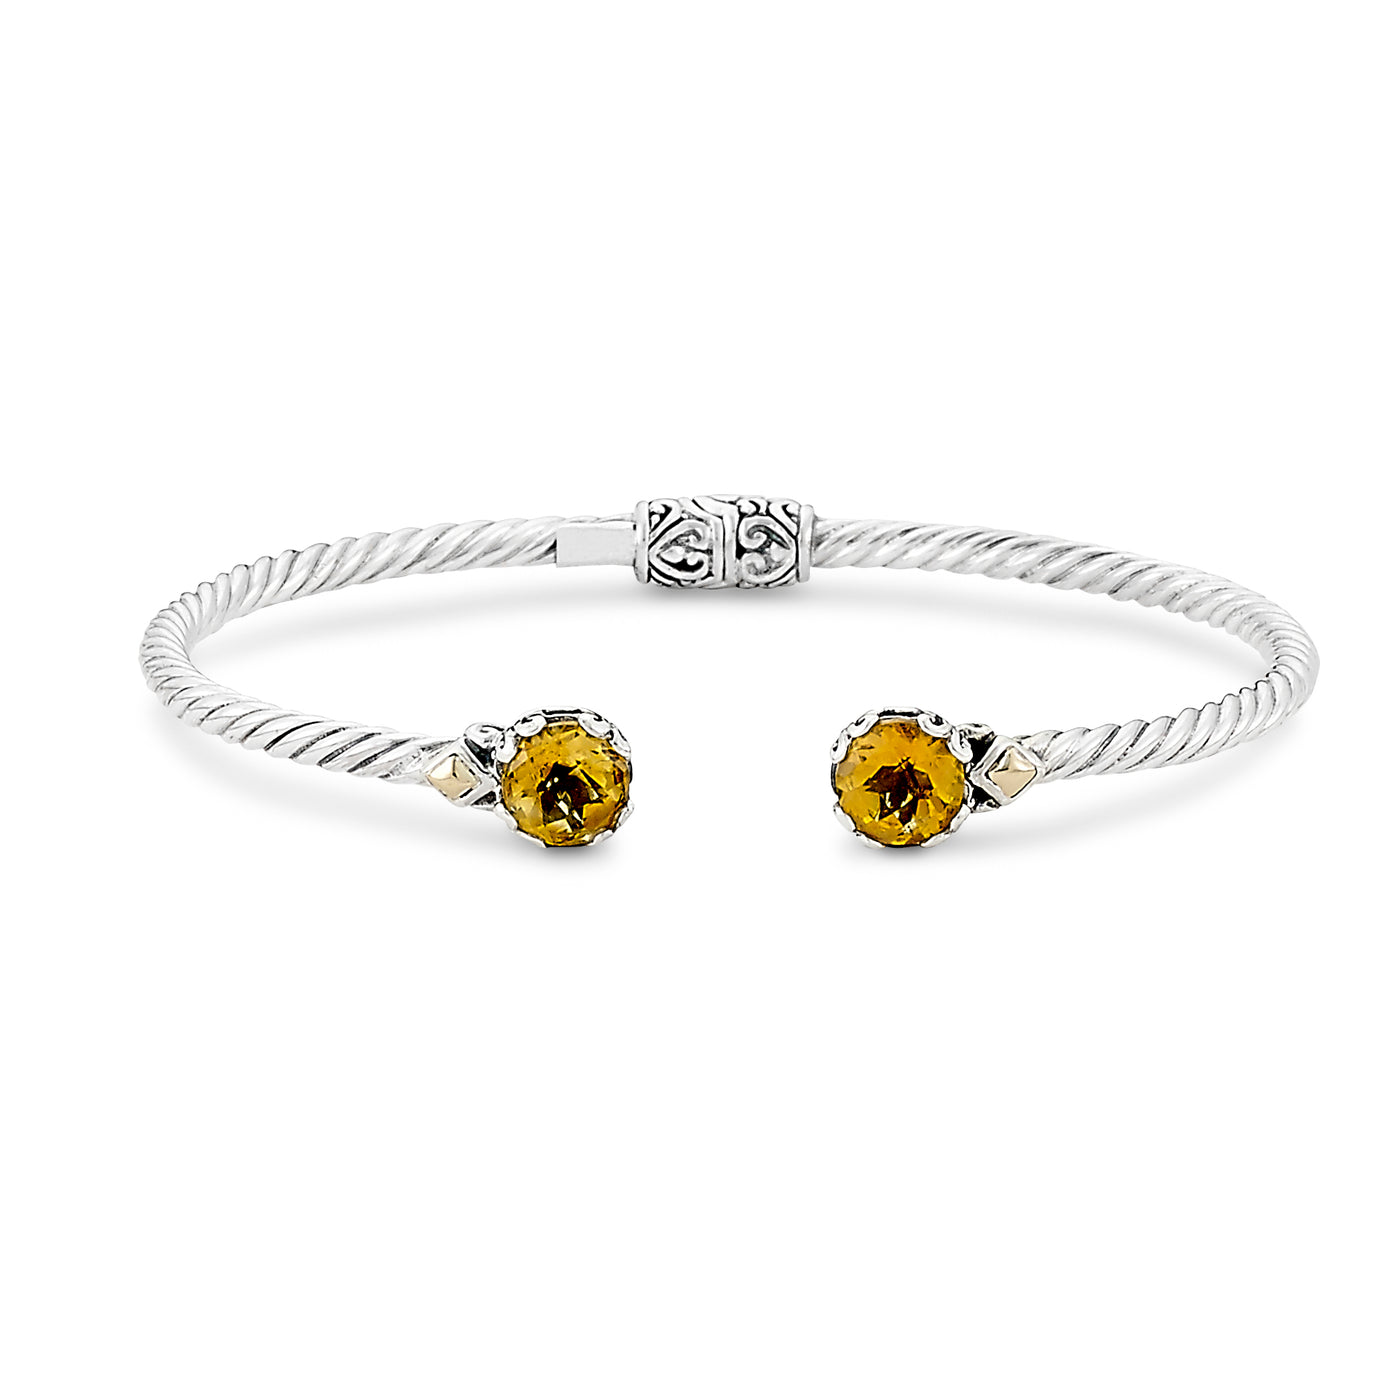 SS/18K 7MM ROUND CITRINE TWISTED CABLE BANGLE IN 3MM